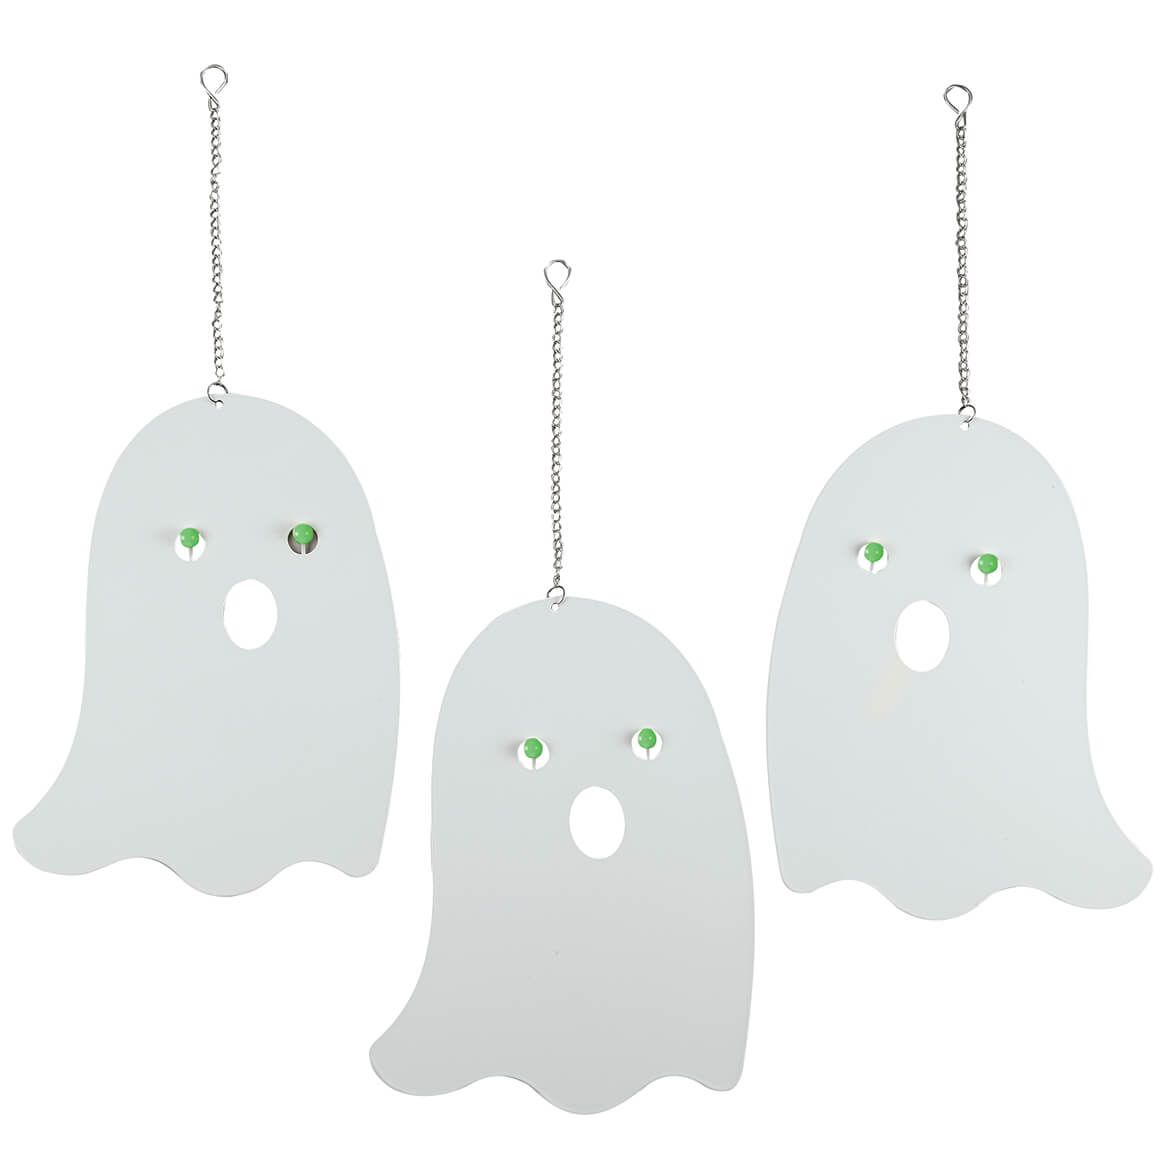 Glow-In-the-Dark Ghosts, Set of 3 by Fox River™ Creations + '-' + 375581